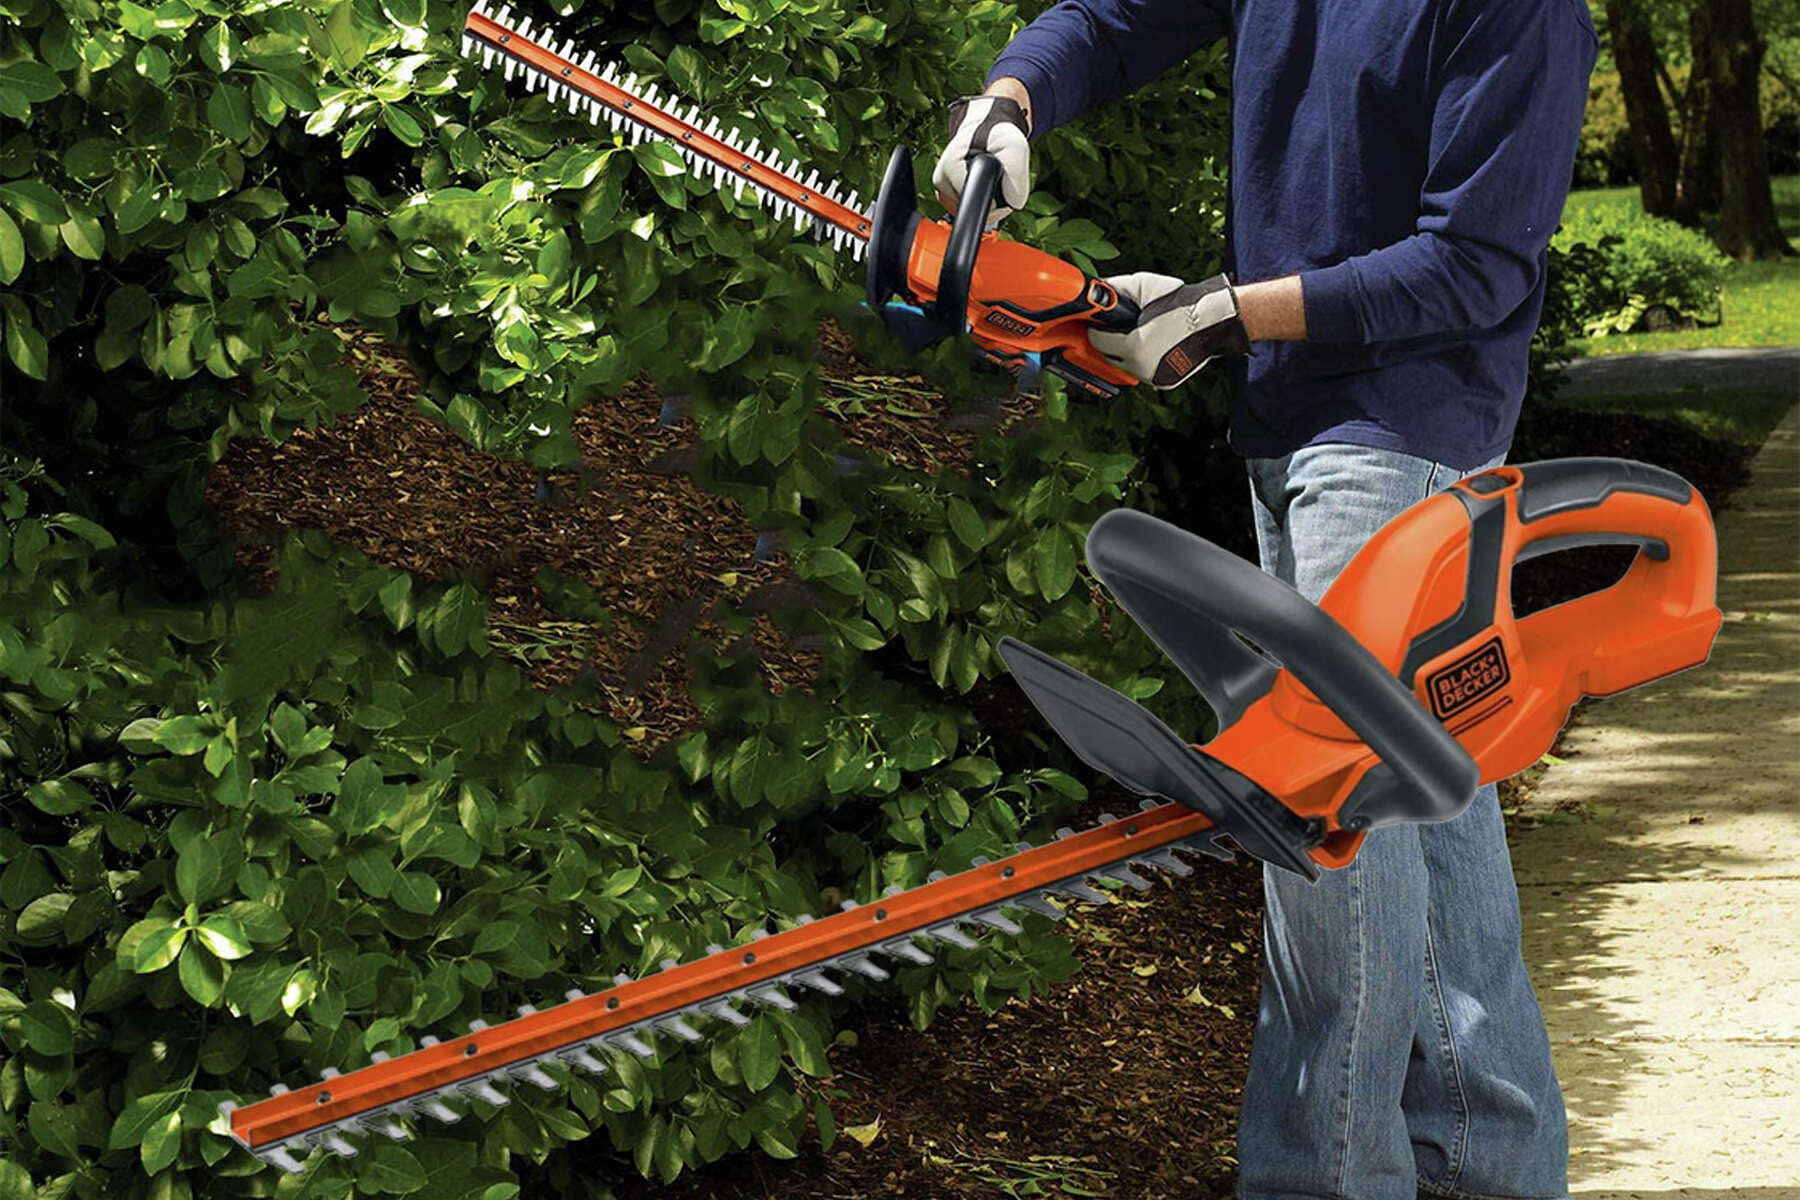 Black+Decker 20V Max Cordless Hedge Trimmer and 50 similar items